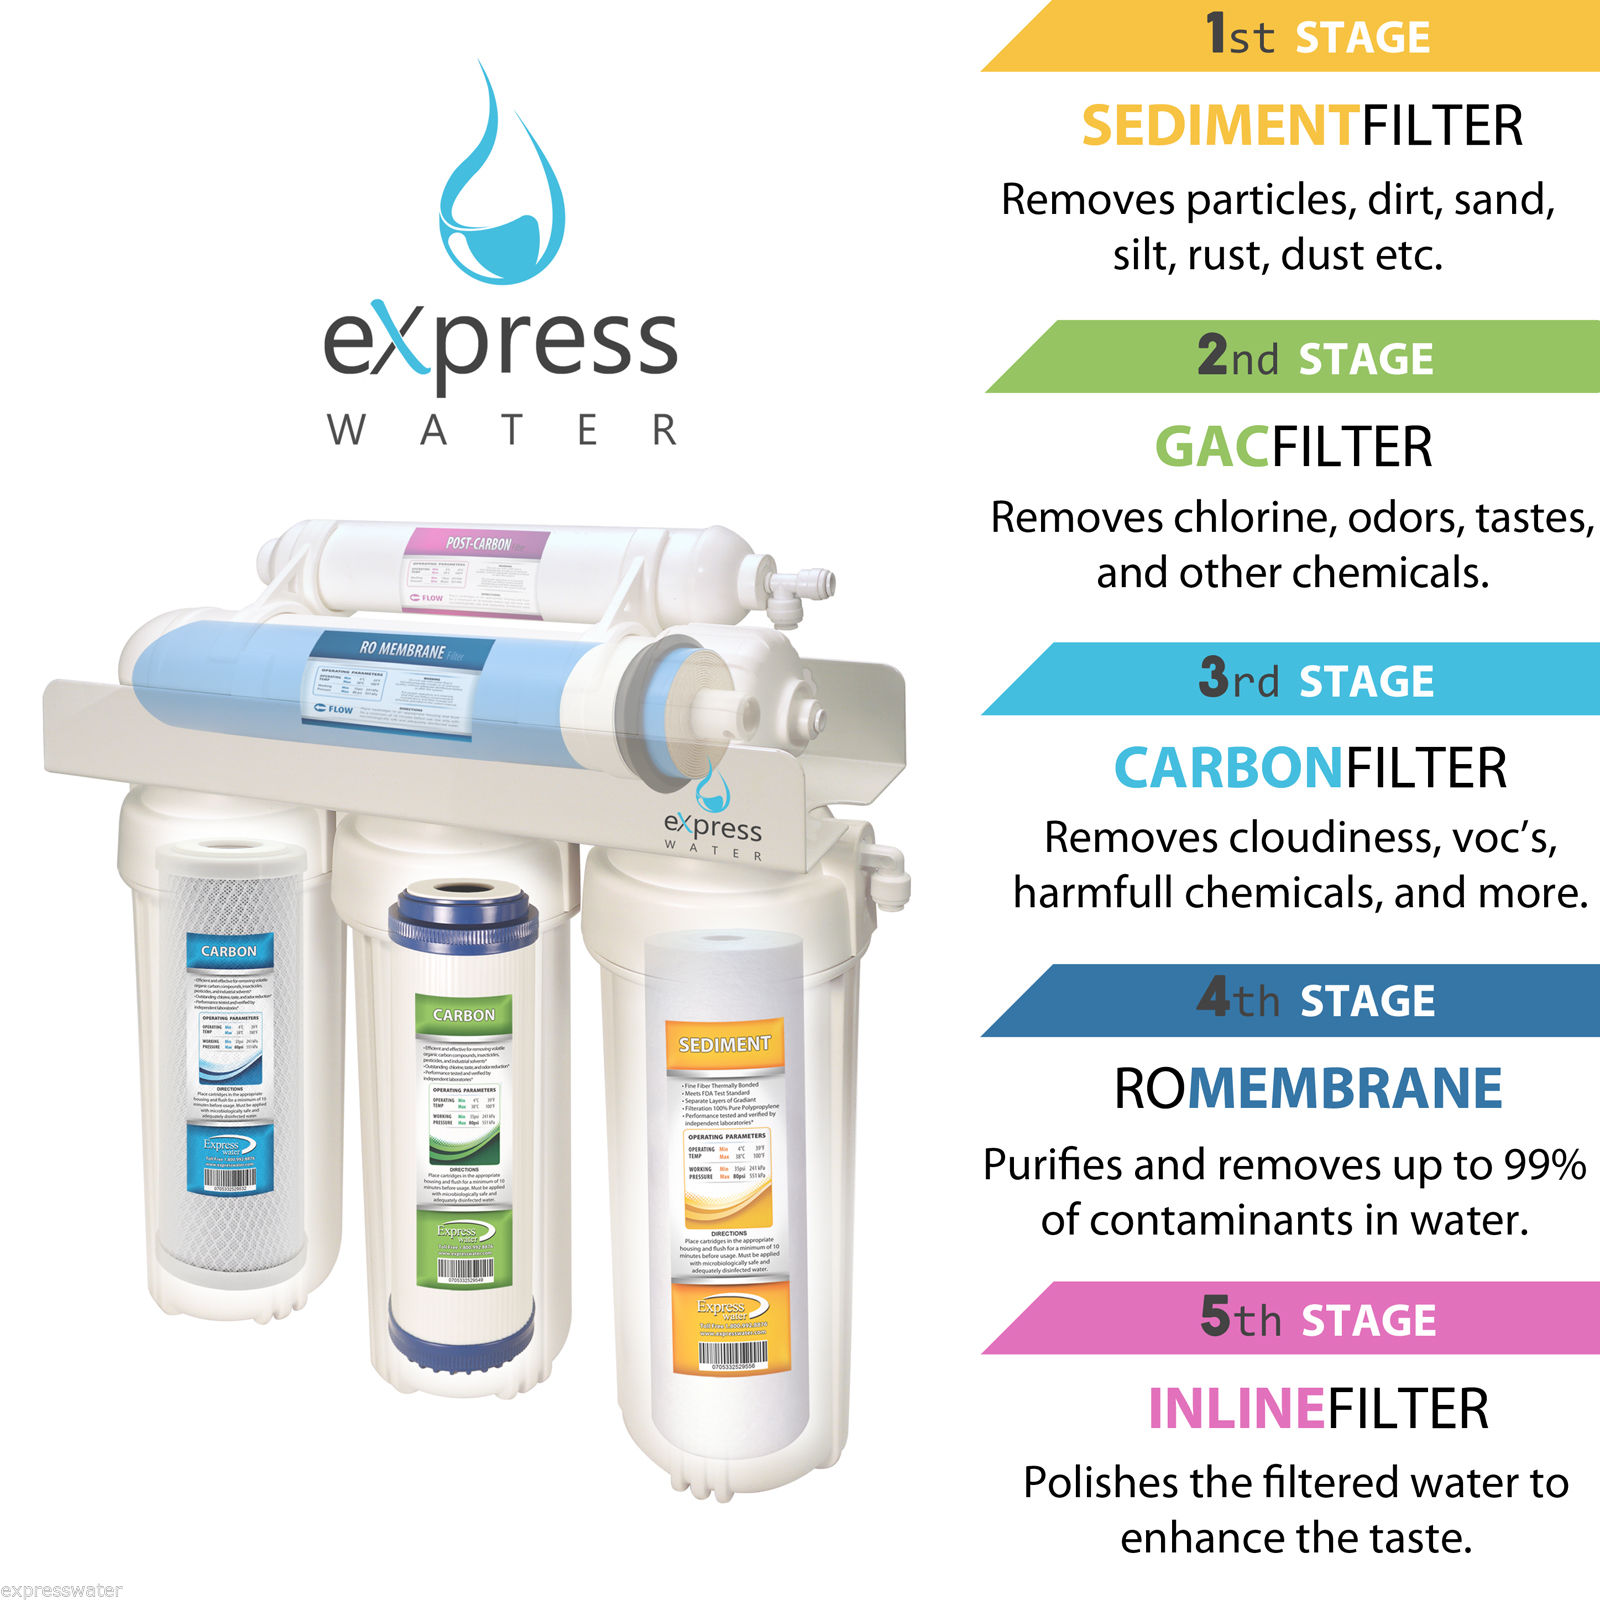 Express Water. Express Water м. Selmar Reverse Osmosis System. Particle Remover. Вода м 160